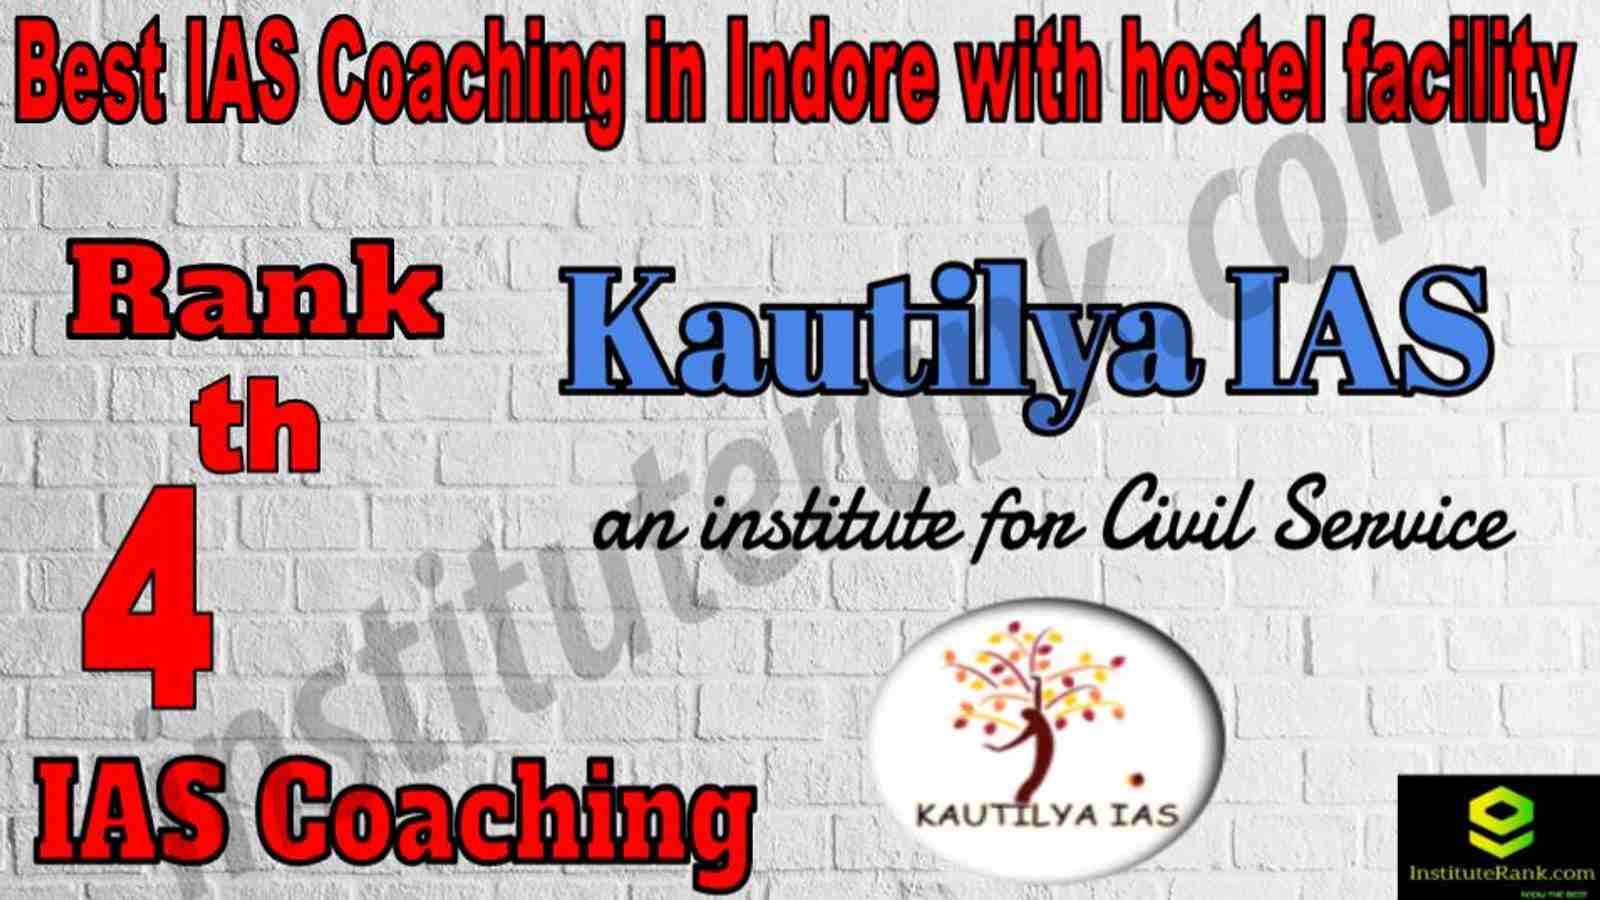 4th Best IAS Coaching in Indore with hostel Facility